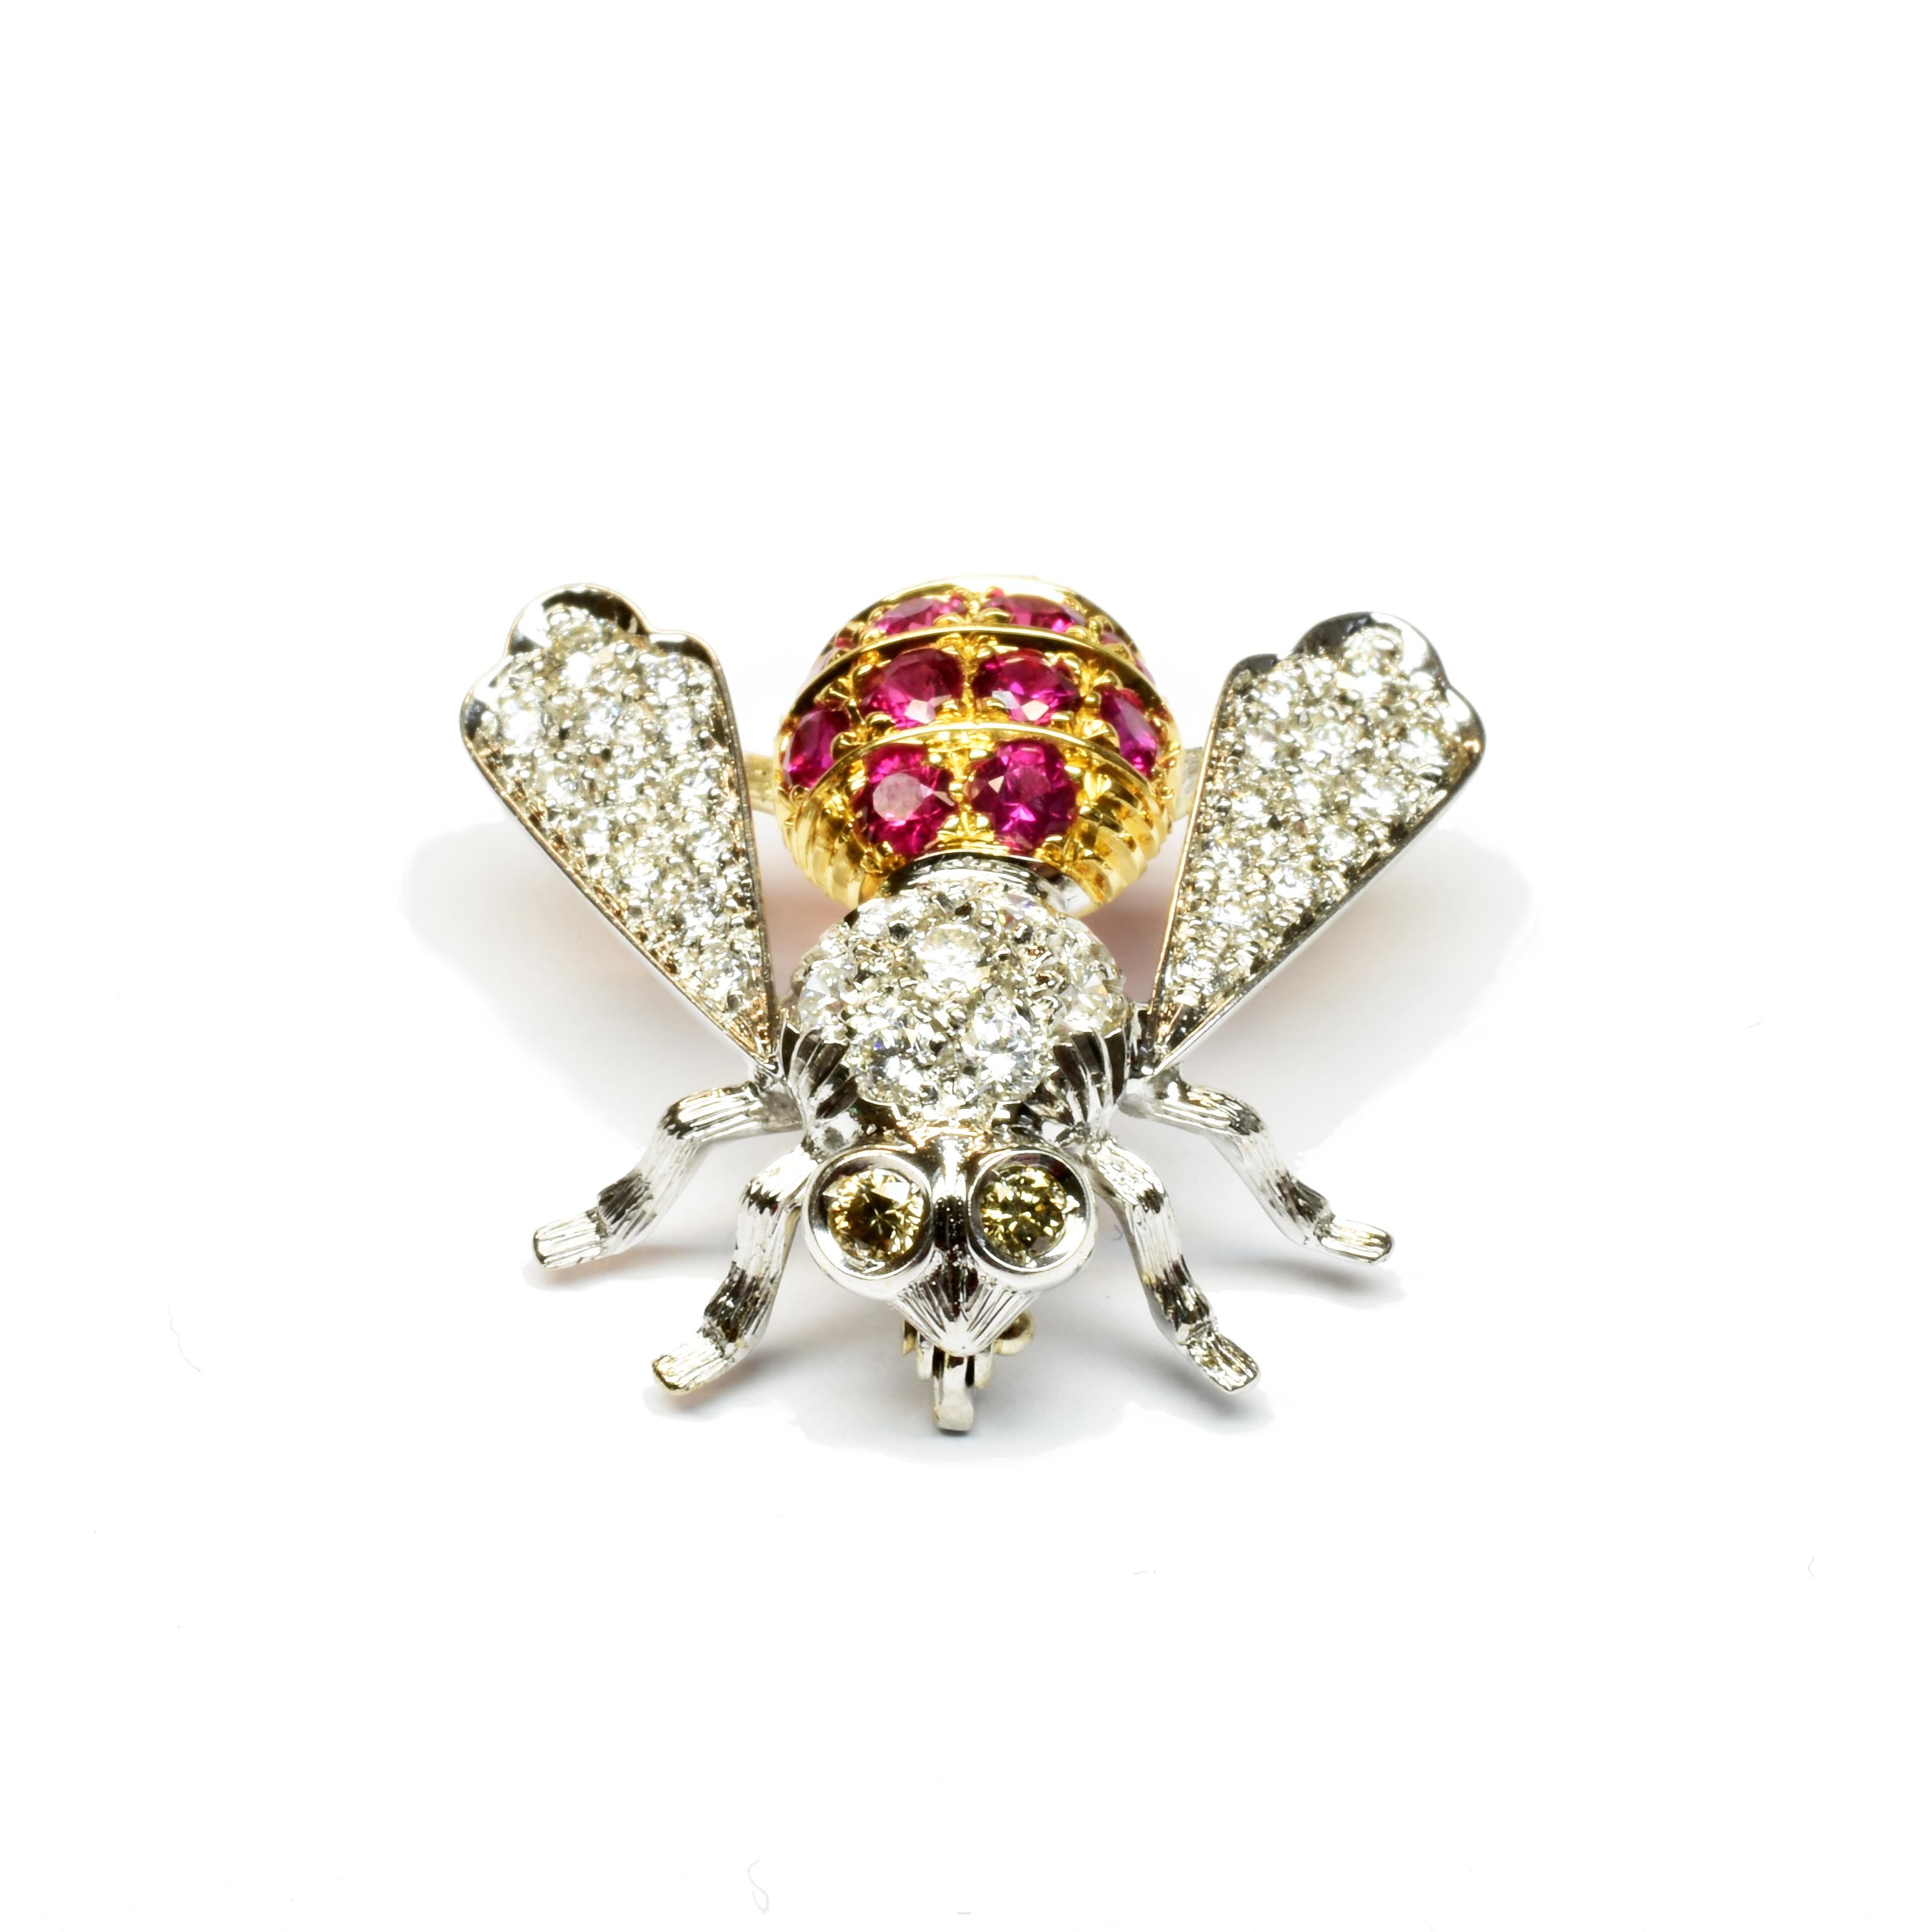 18 Kt Gold Bee Brooch with White Diamonds, Natural Pink Red Rubies and Champagne Diamonds Eyes.
Handmade in our Atelier in Valenza Italy.
Looks perfect on a Business Jacket or on a Cocktail Dress. 
This nice Brooch can be made in any combination of